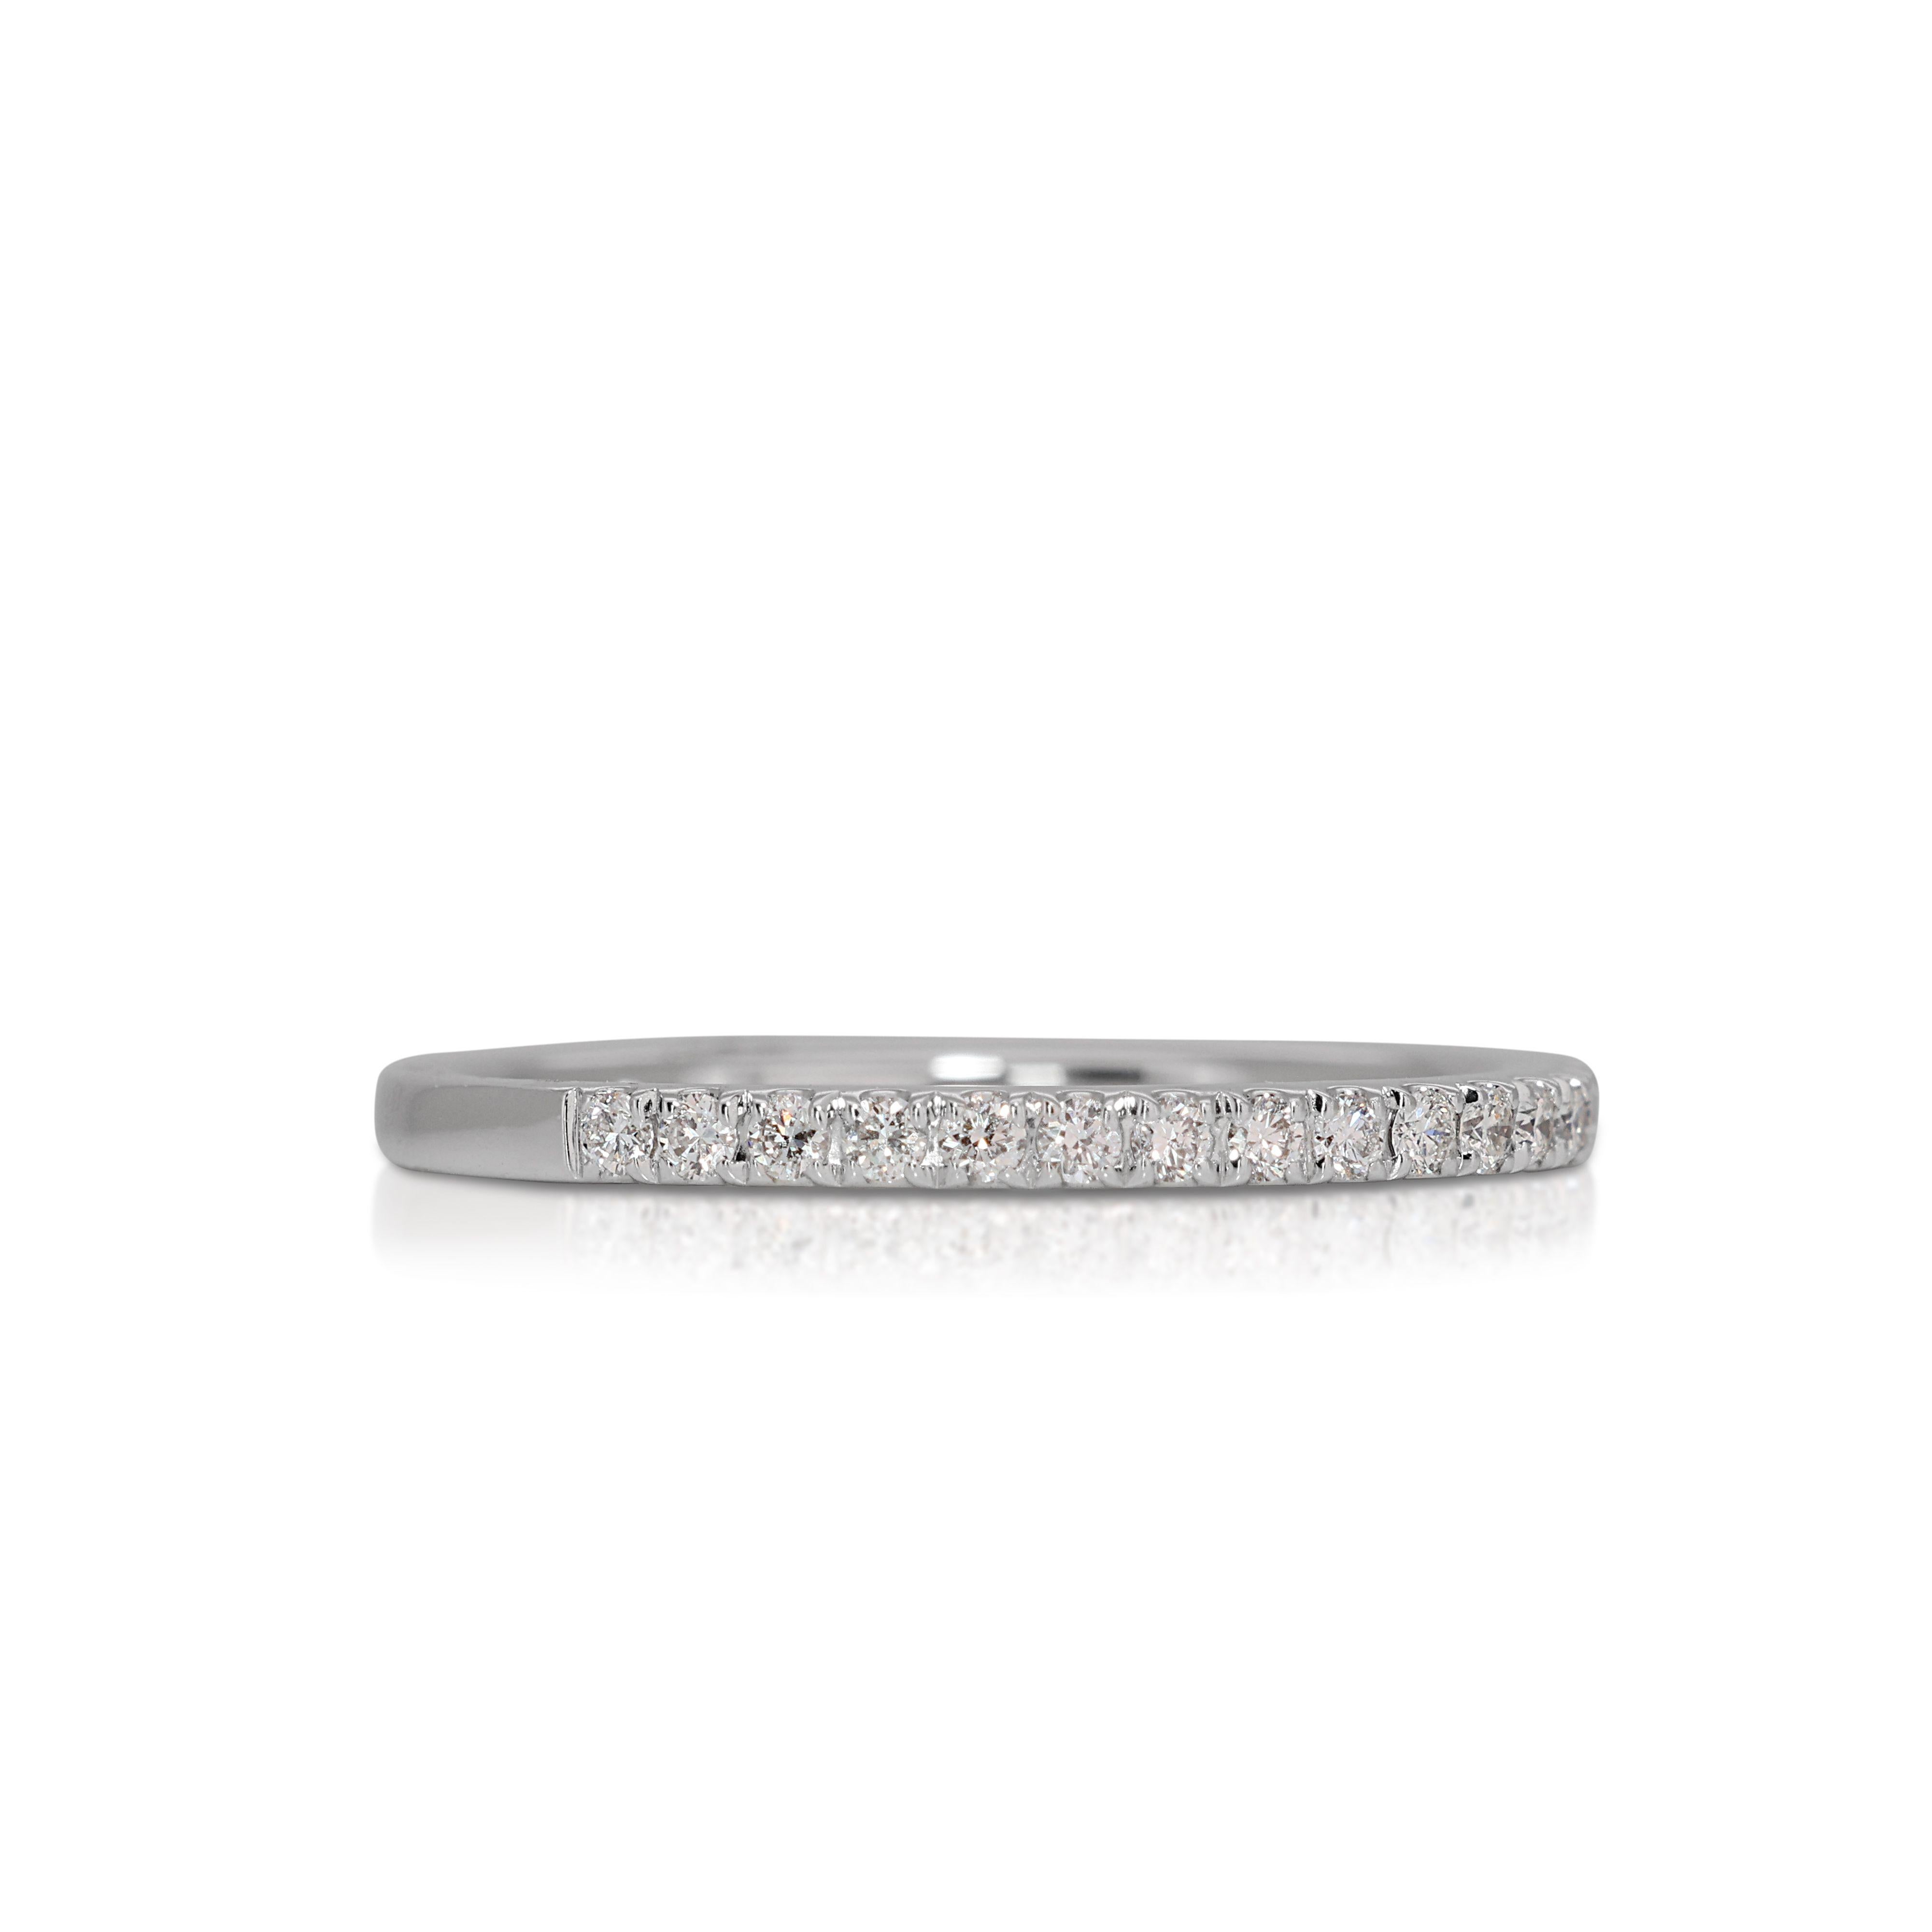 The band of the ring is thoughtfully designed for both comfort and style, offering a sleek and polished finish that ensures the piece is not only breathtaking but also comfortable to wear. The use of 18K white gold enhances the sparkle of the